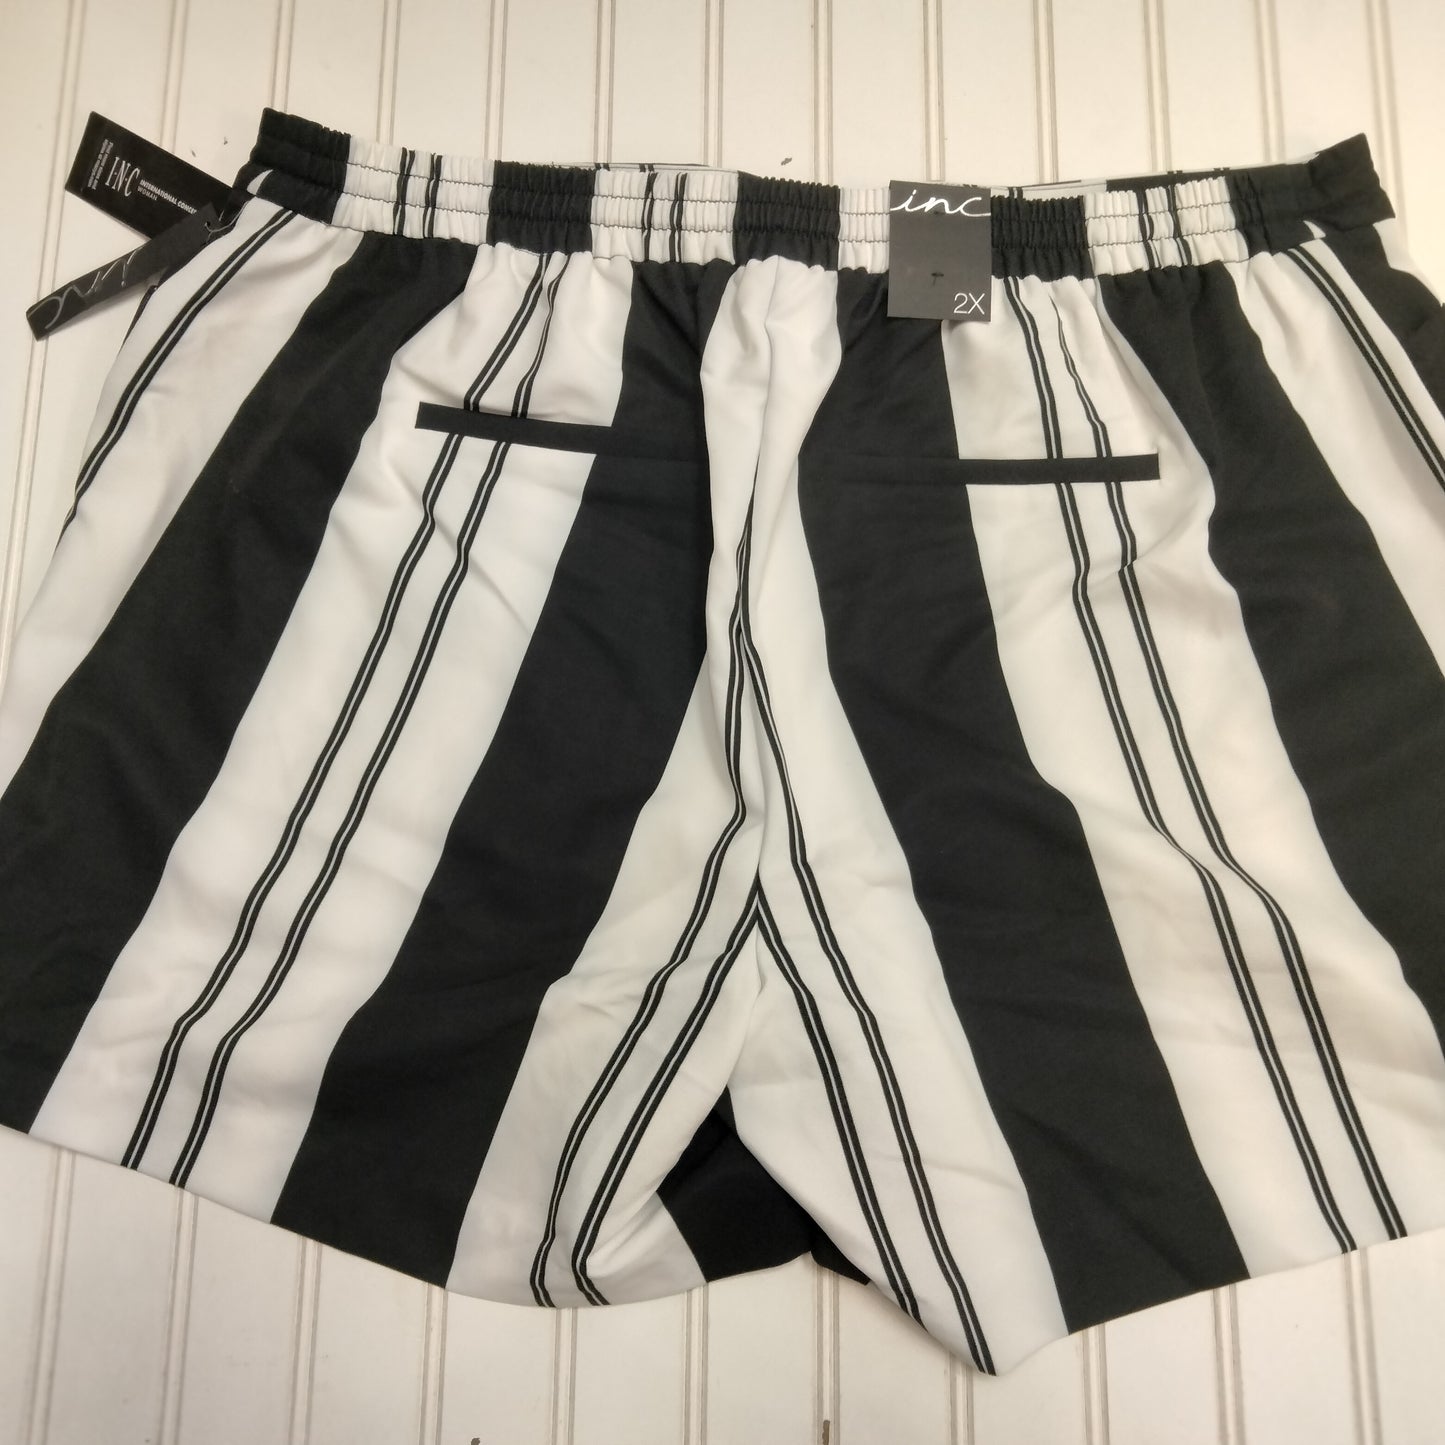 Shorts By Inc  Size: 2x